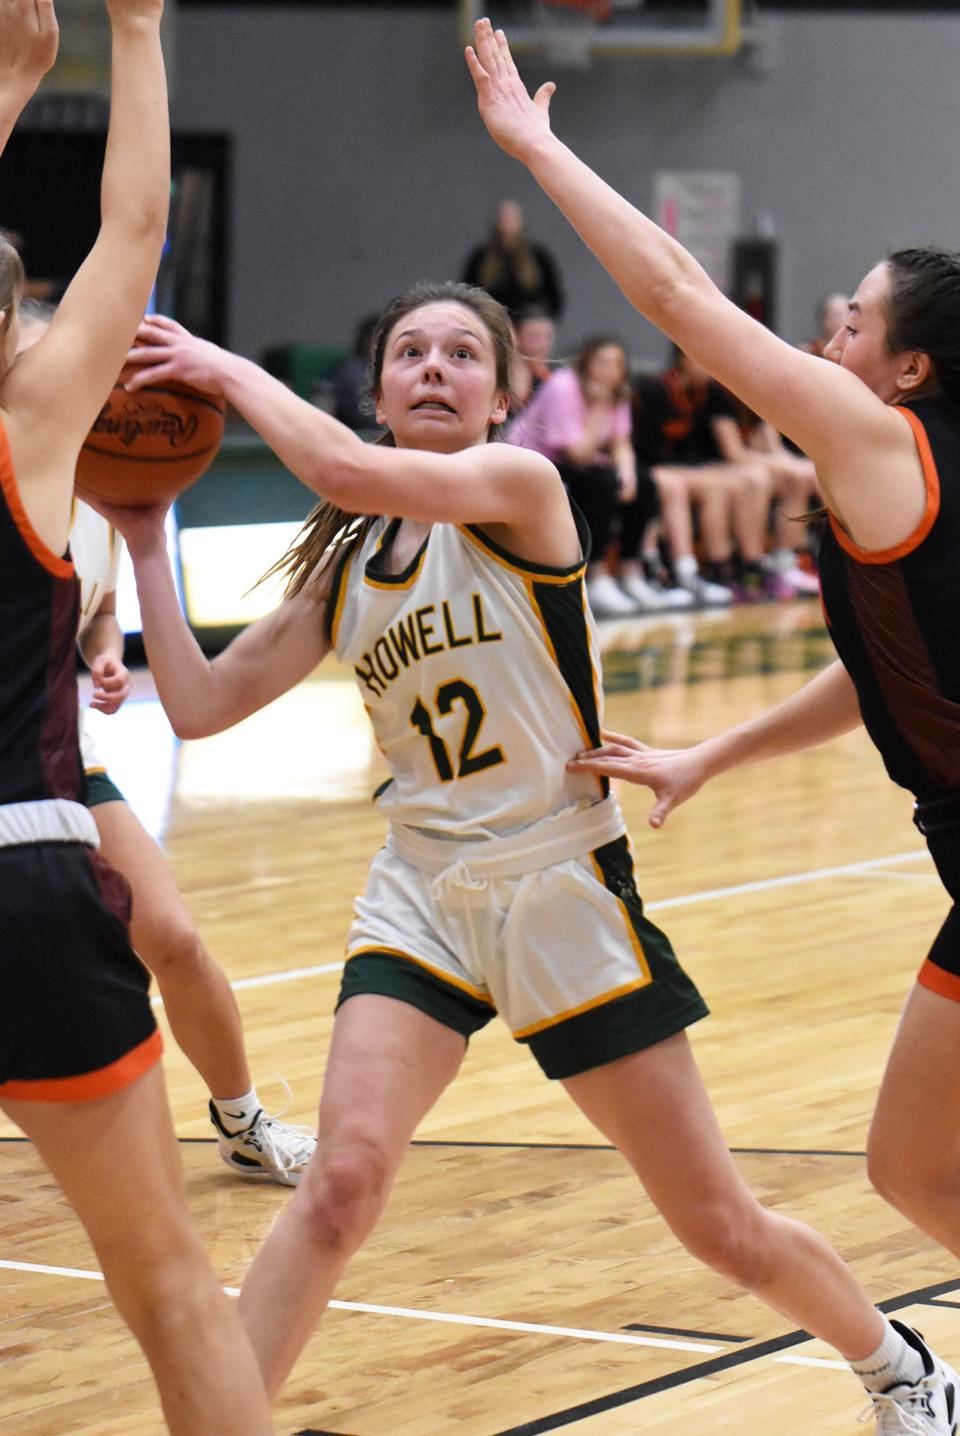 Molly Deurloo had a team-high 21 points for Howell in a 57-41 loss to Brighton on Tuesday, Jan. 10, 2023.